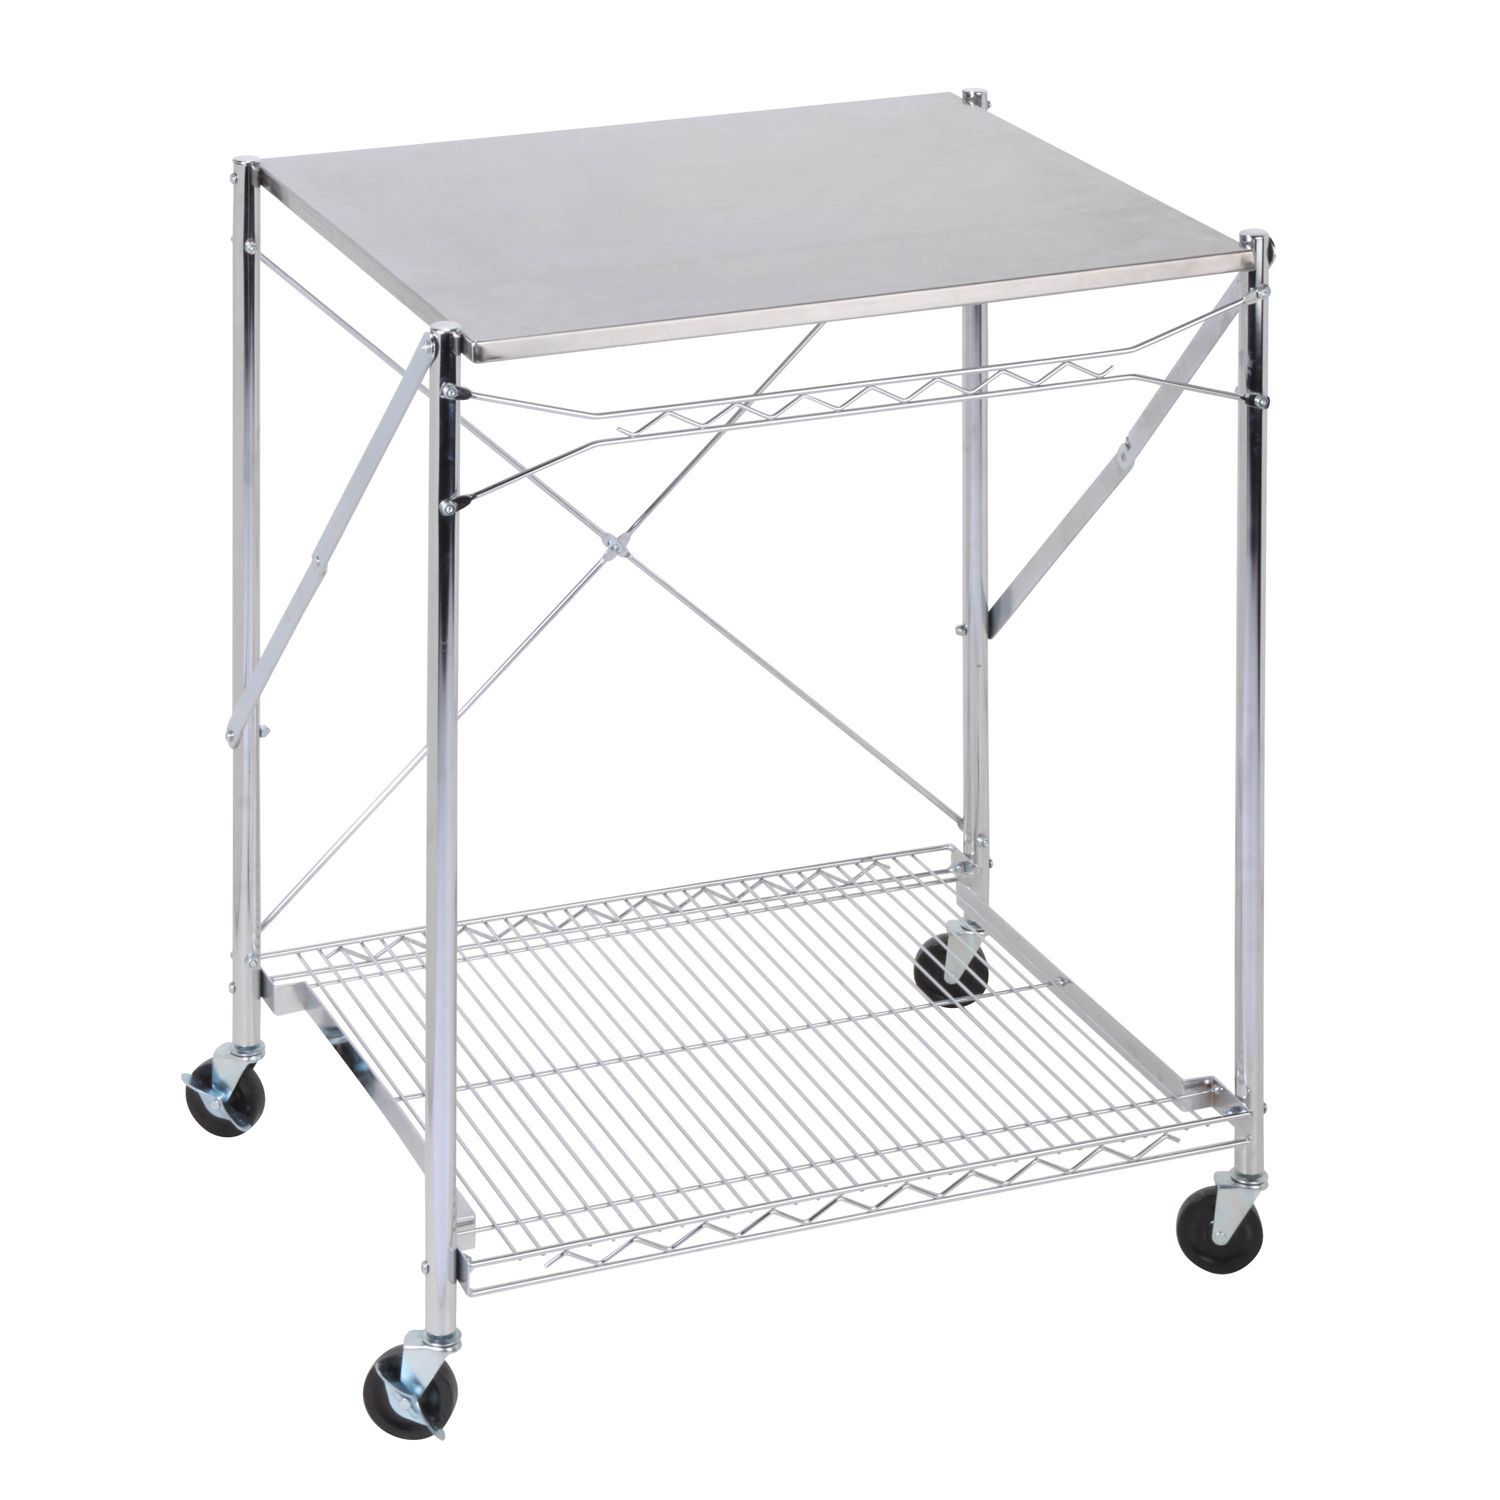 Image for Honey-Can-Do Stainless Steel Folding Work Table at Kohl's.